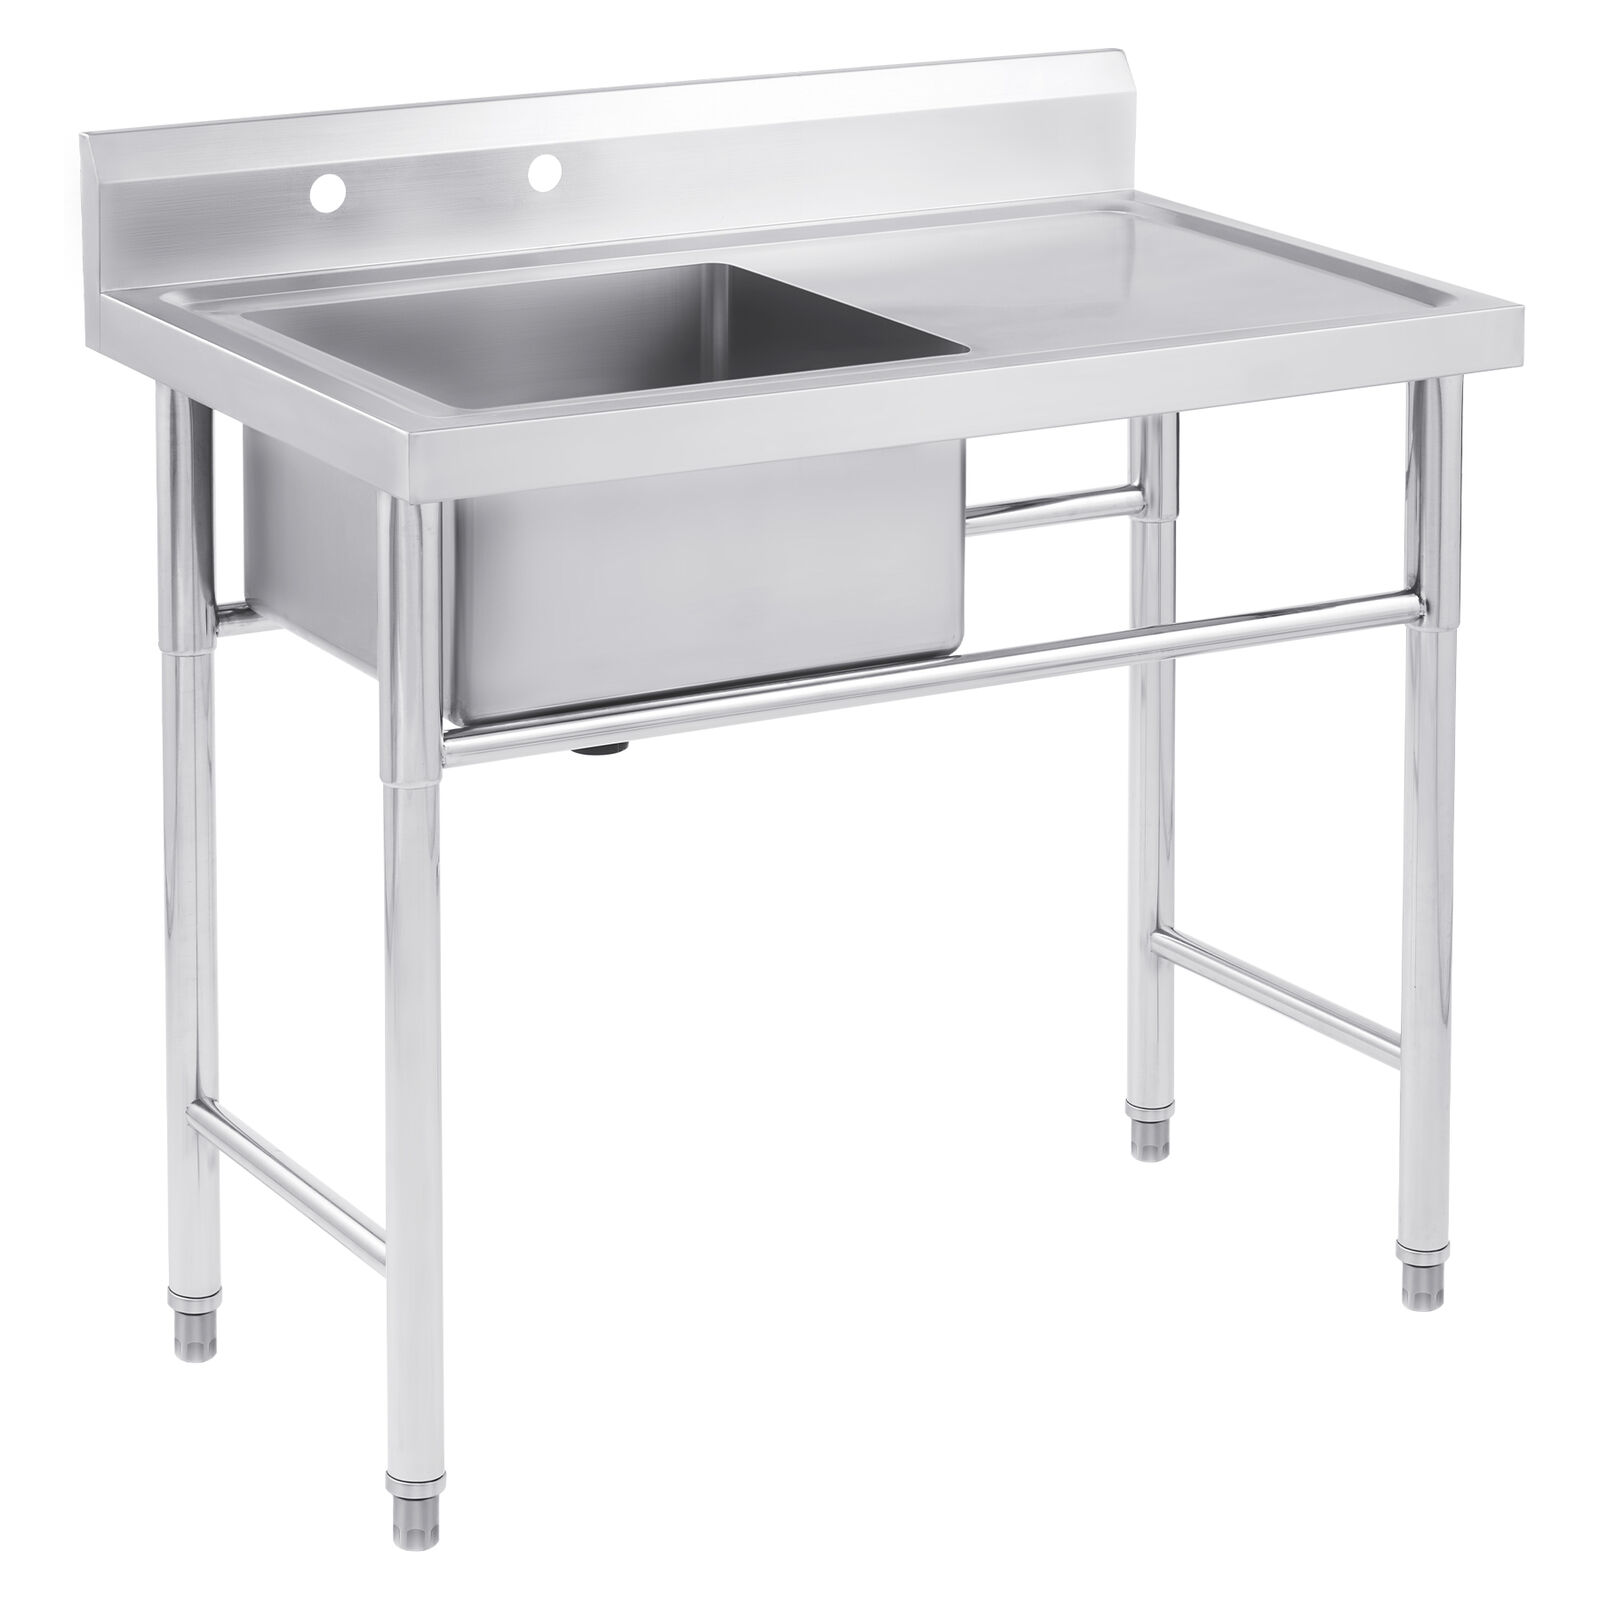 Commercial Utility Prep Sink Stainless Steel 1 Compartment & Drainboard